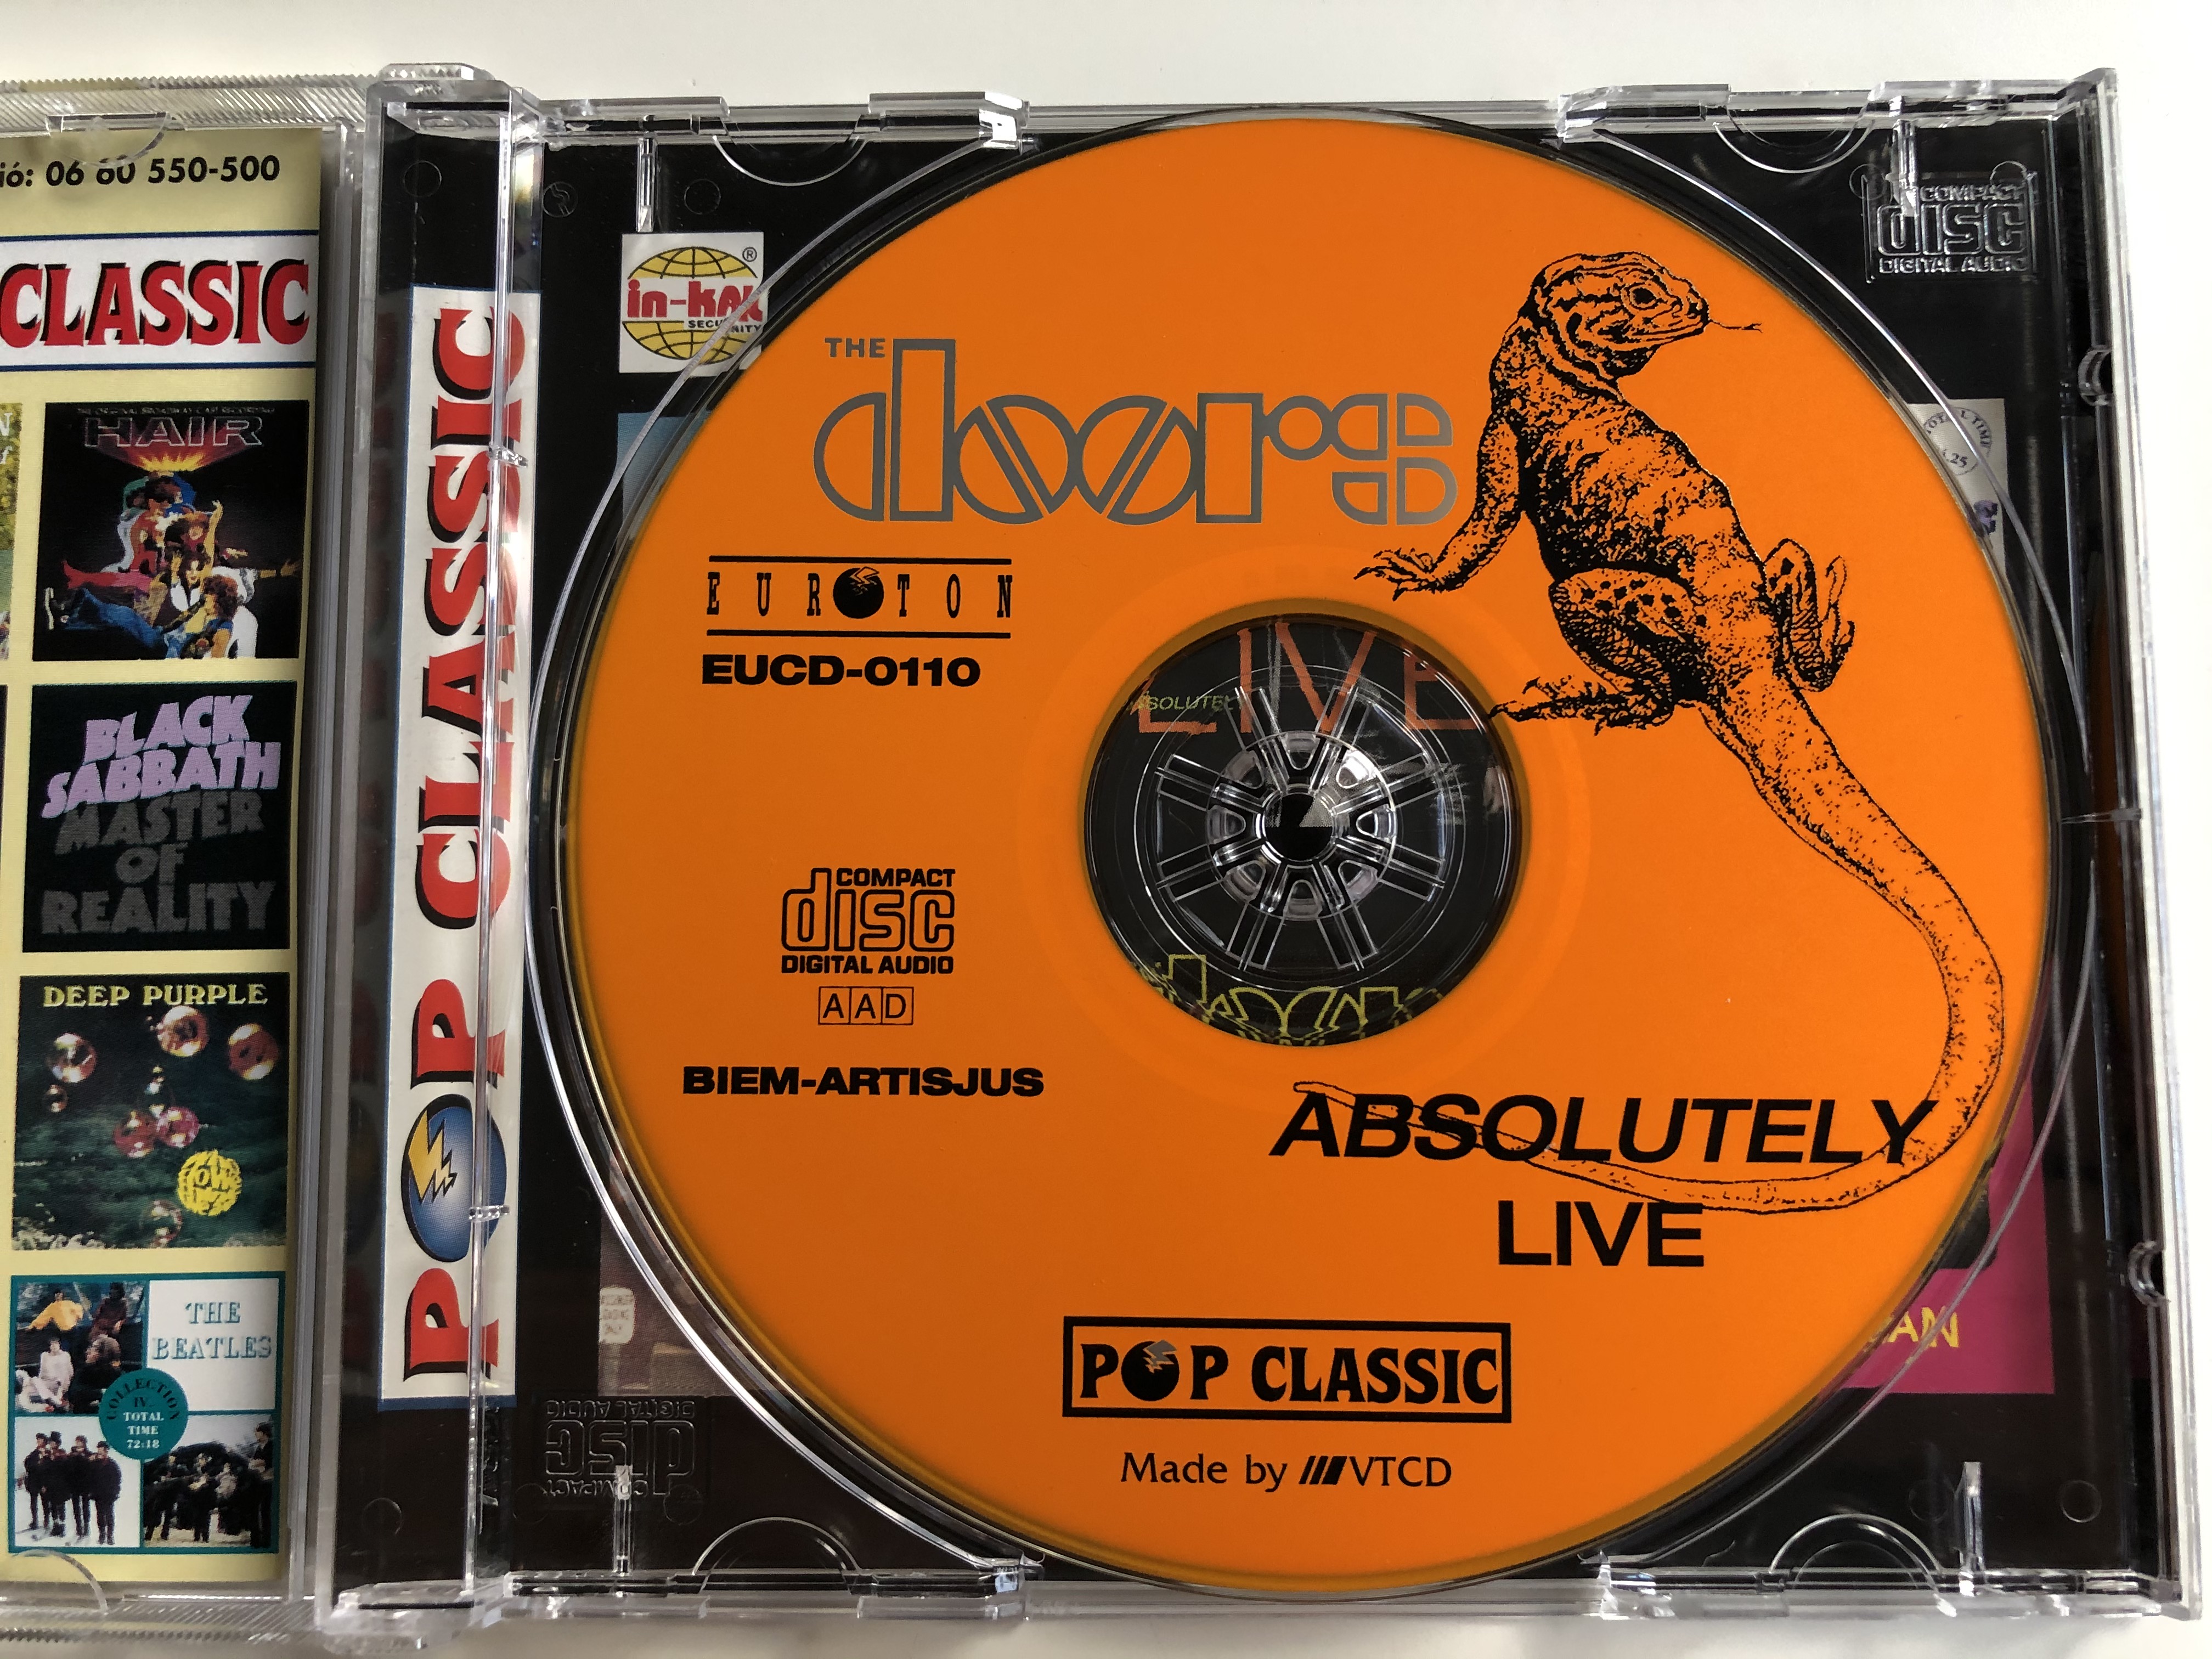 the-doors-absolutely-live-total-time-77-18-pop-classic-euroton-audio-cd-eucd-0110-2-.jpg